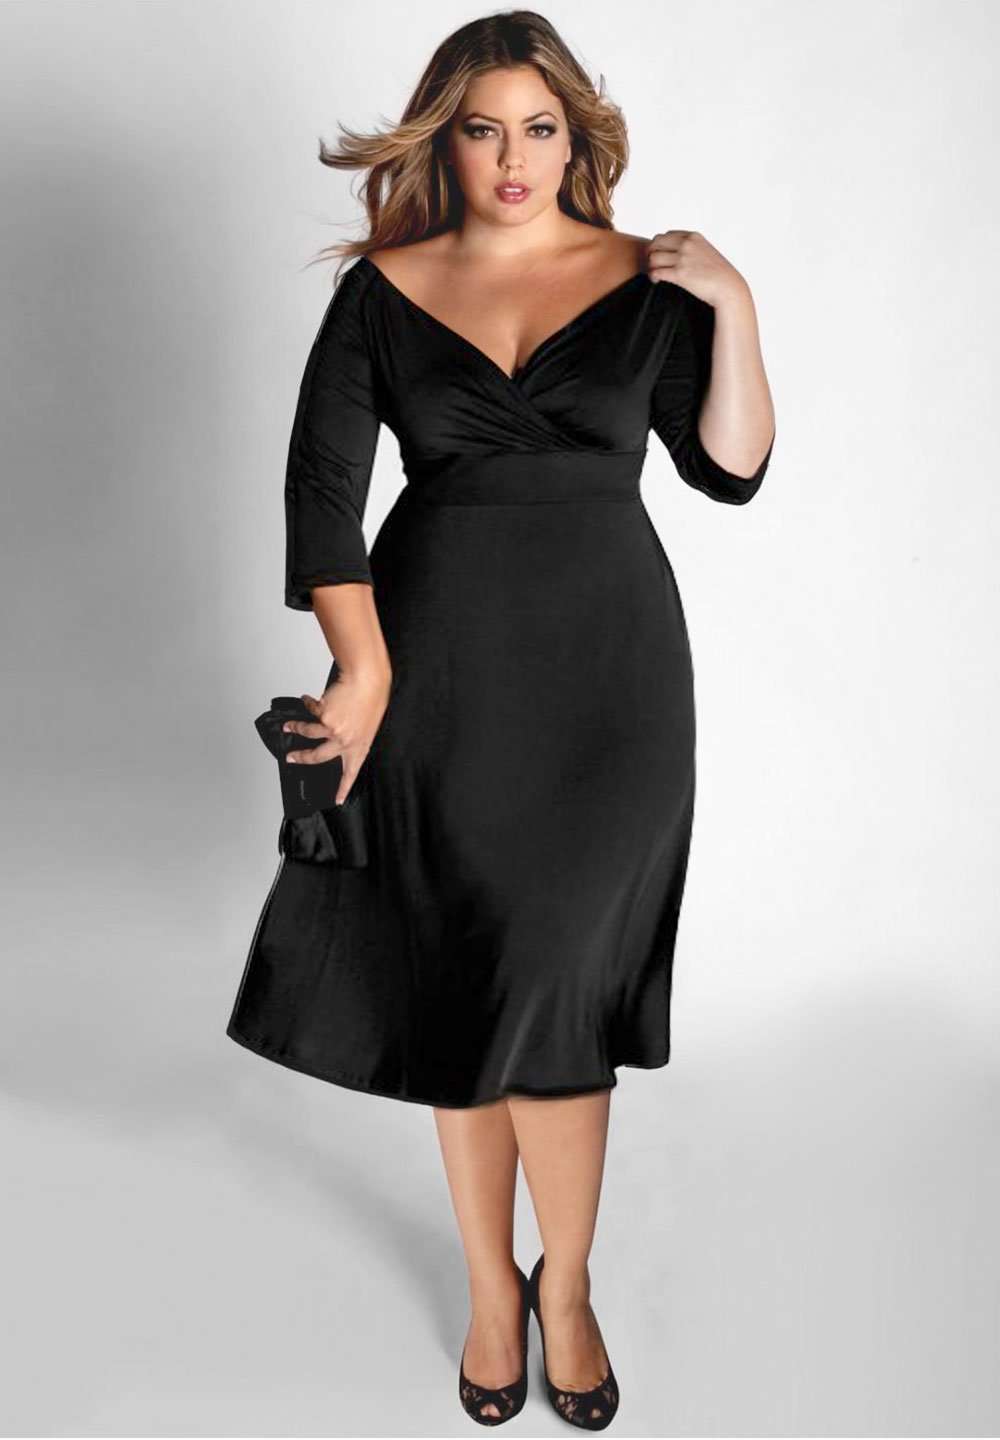 Best plus size party dresses 2022 to buy in the UK | Evening Standard